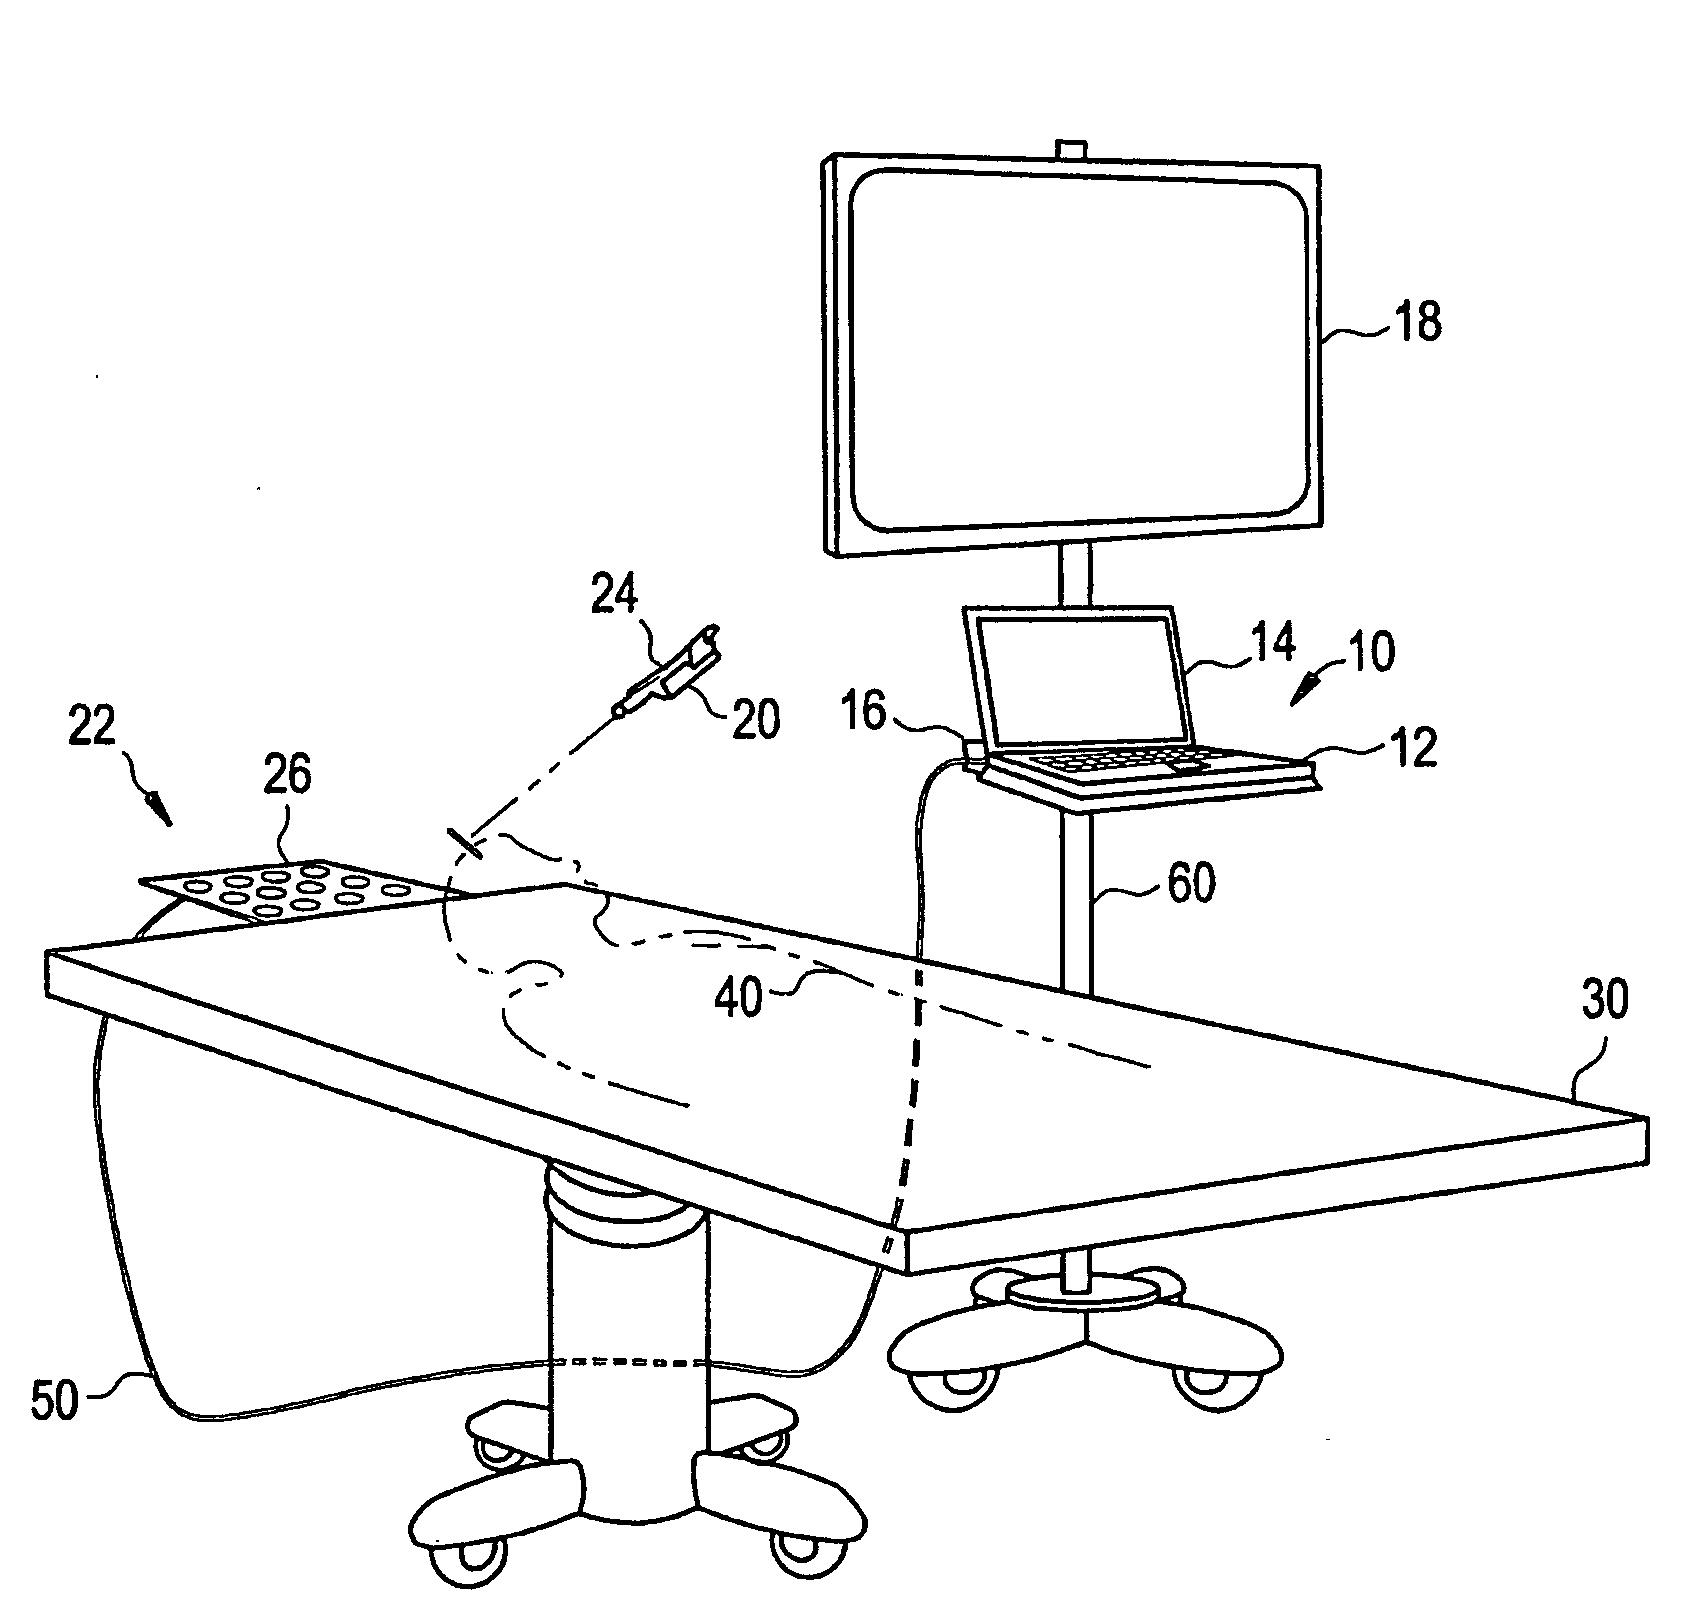 Systems and methods for annotation and sorting of surgical images